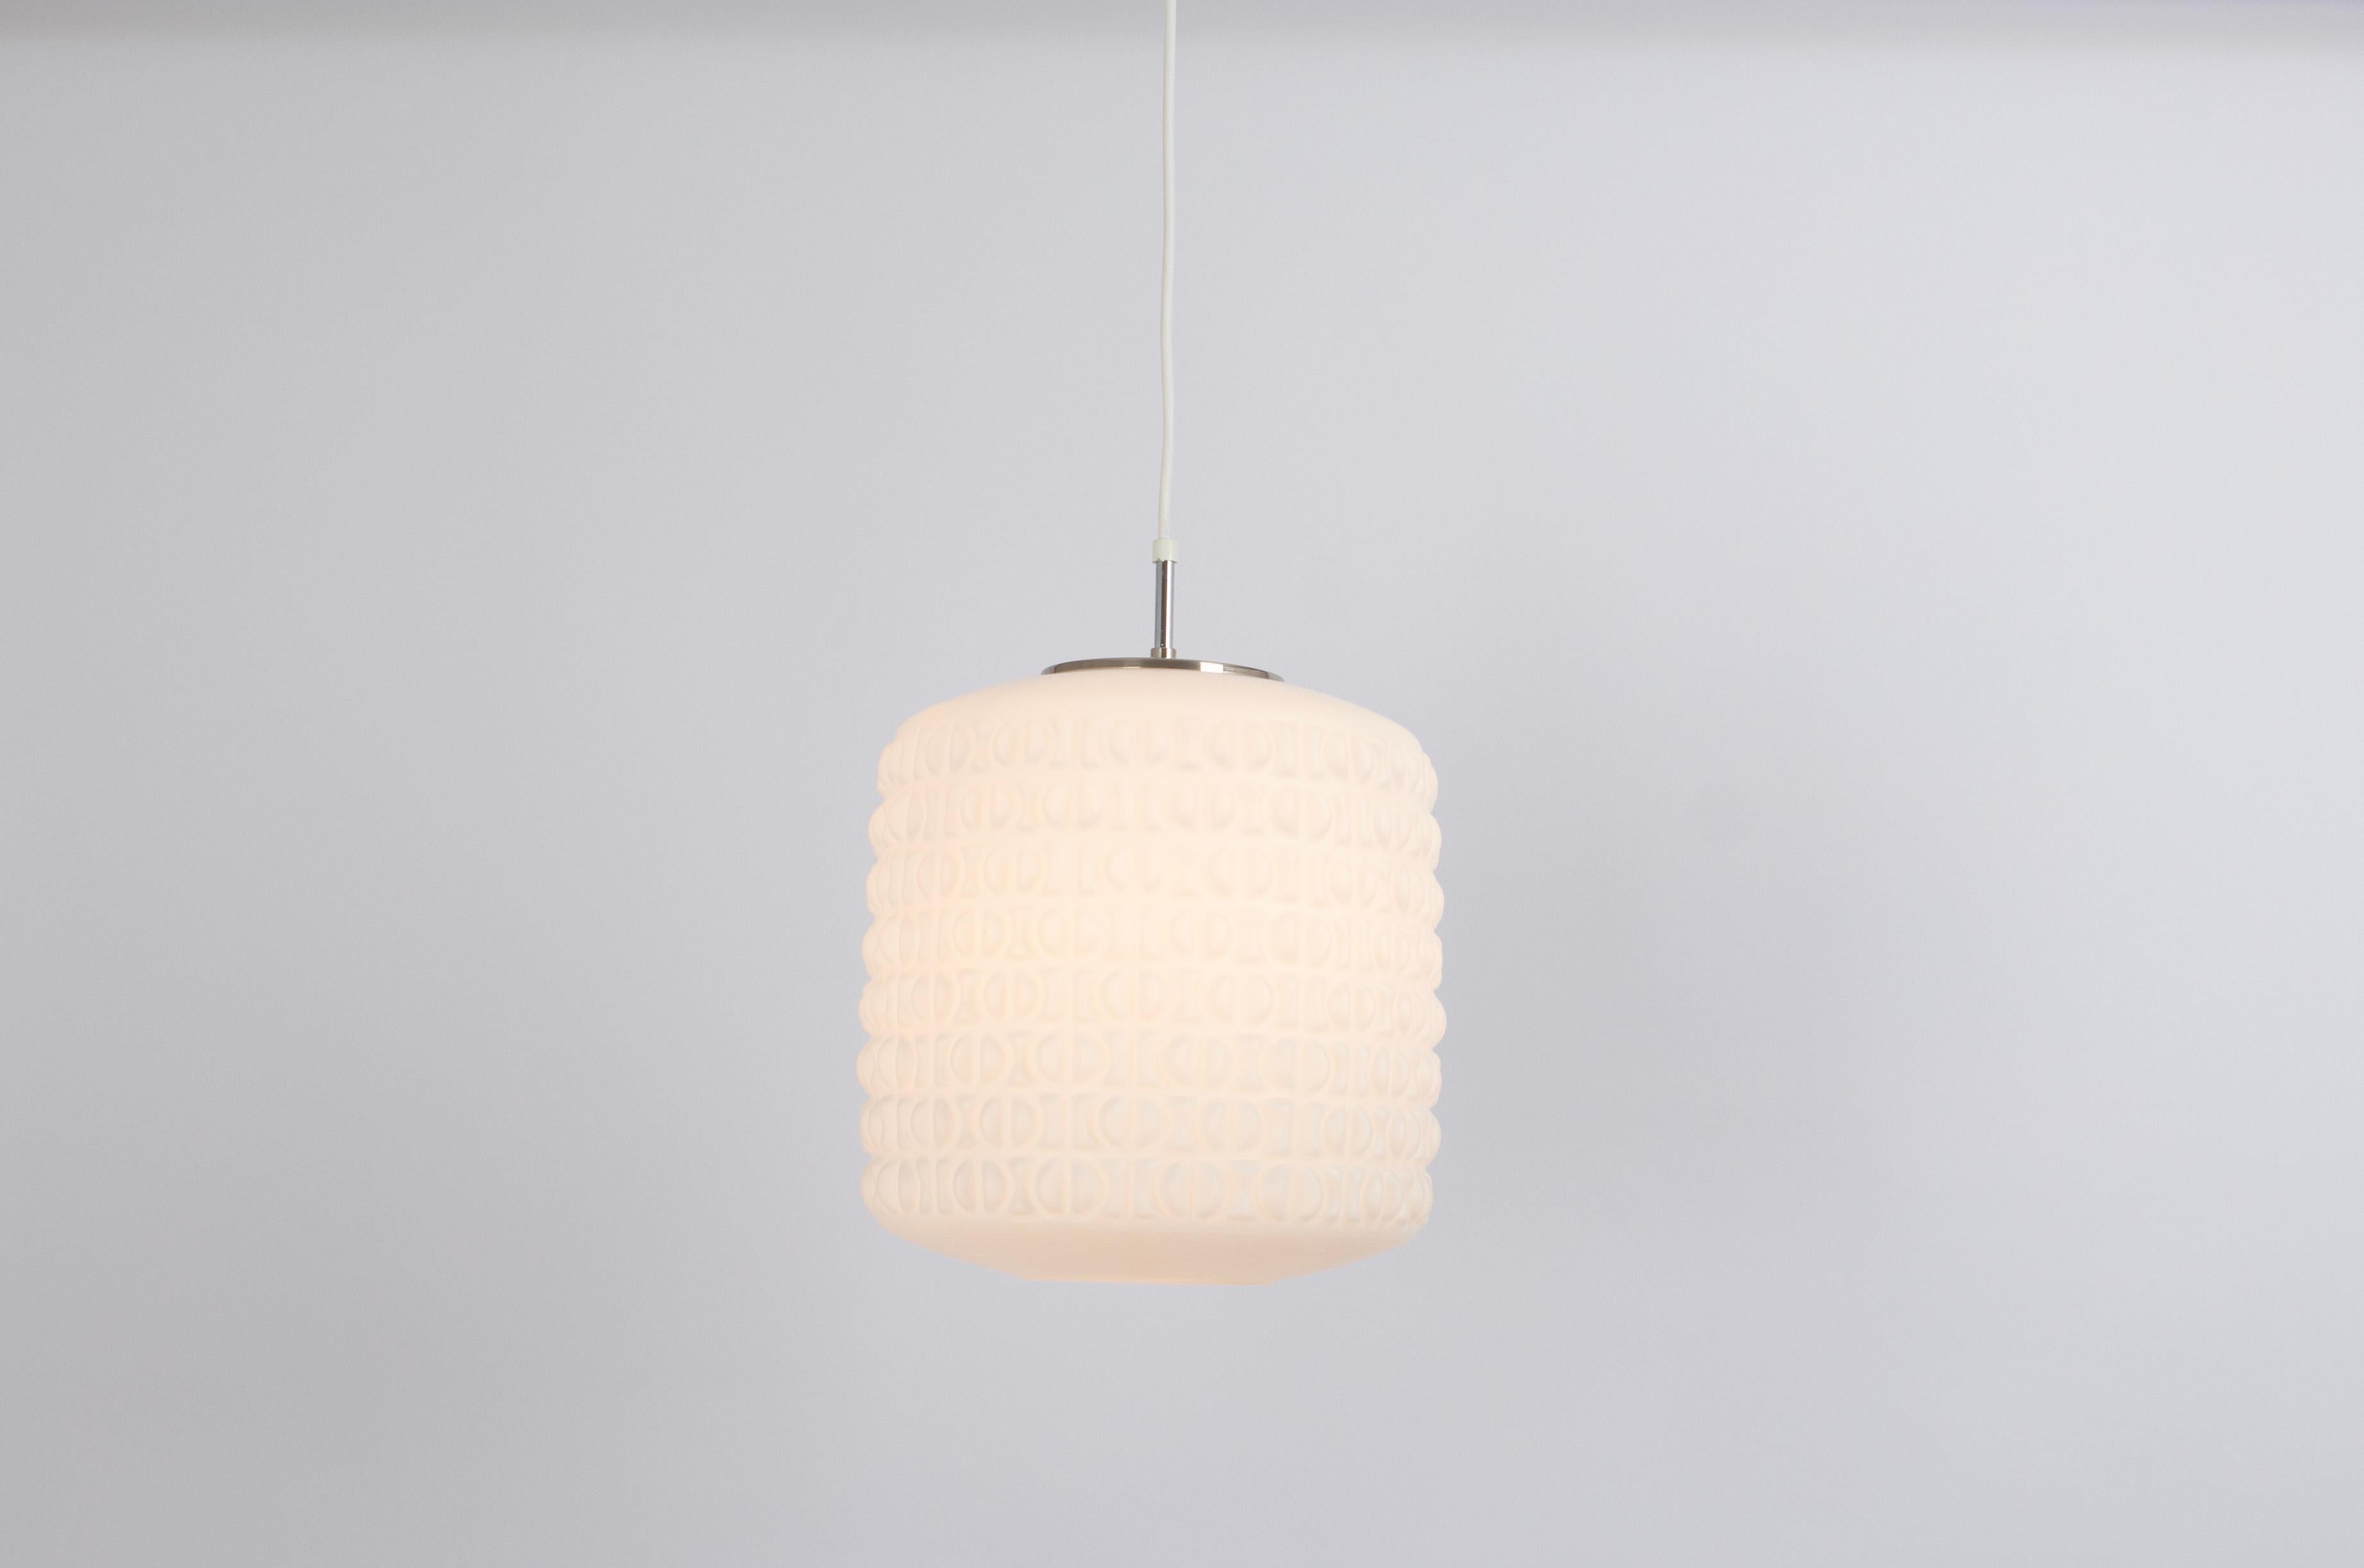 Stunning Pendant light designed by Aloys F. Gangkofner for Peill & Putzler , Germany, 1950s

Sockets: One x E27 standard bulb. (100 W max).
Light bulbs are not included. It is possible to install this fixture in all countries (US, UK, Europe, Asia,